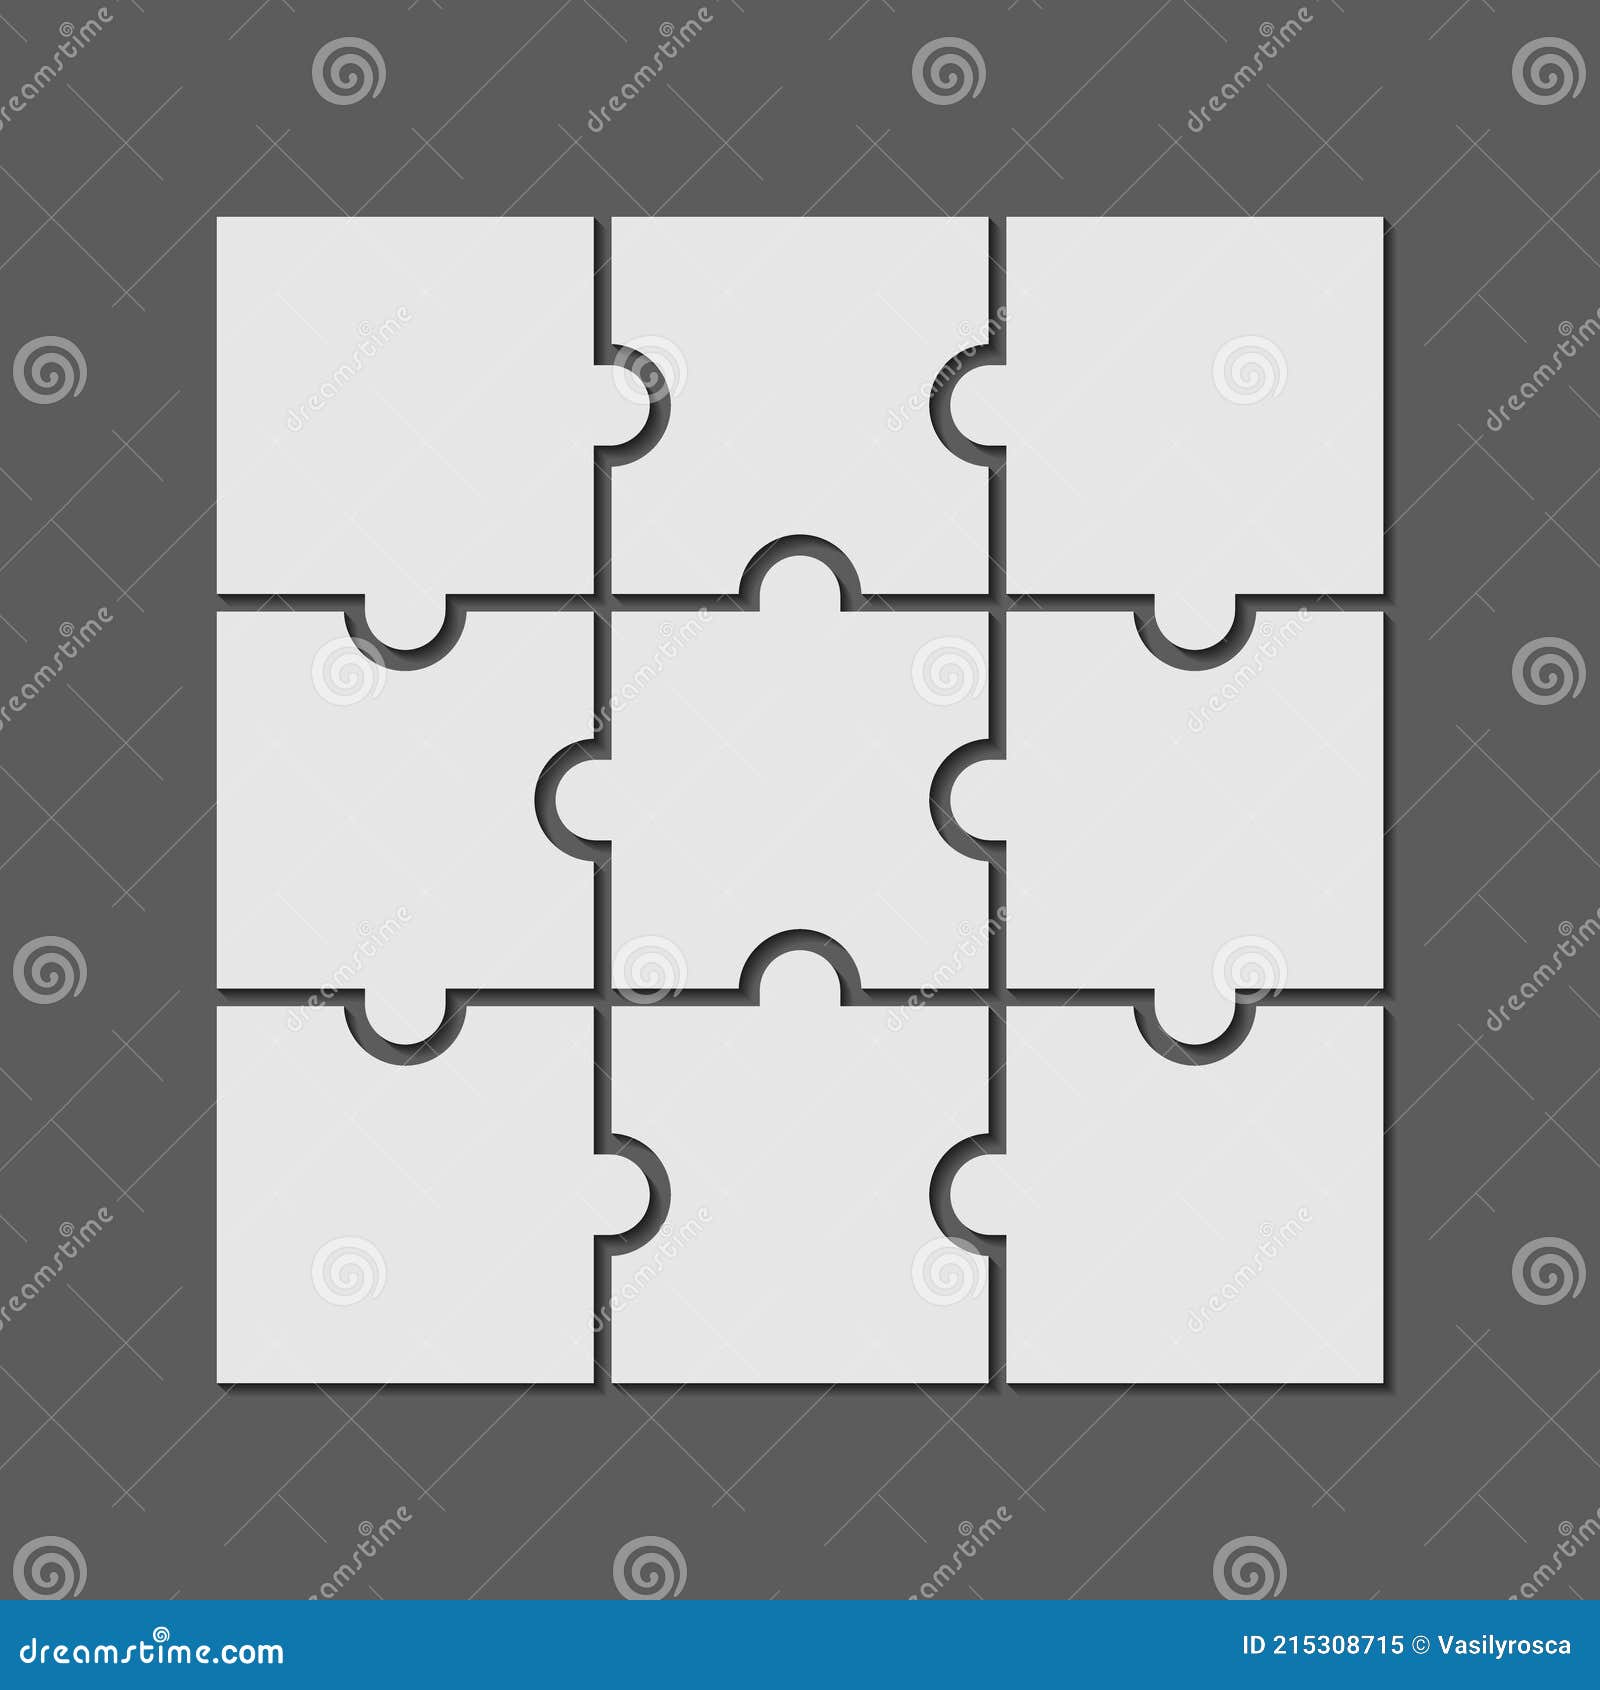 9 Piece Jigsaw Vector Background. 3x3 Business Puzzle Stock - Illustration of outline, chart: 215308715